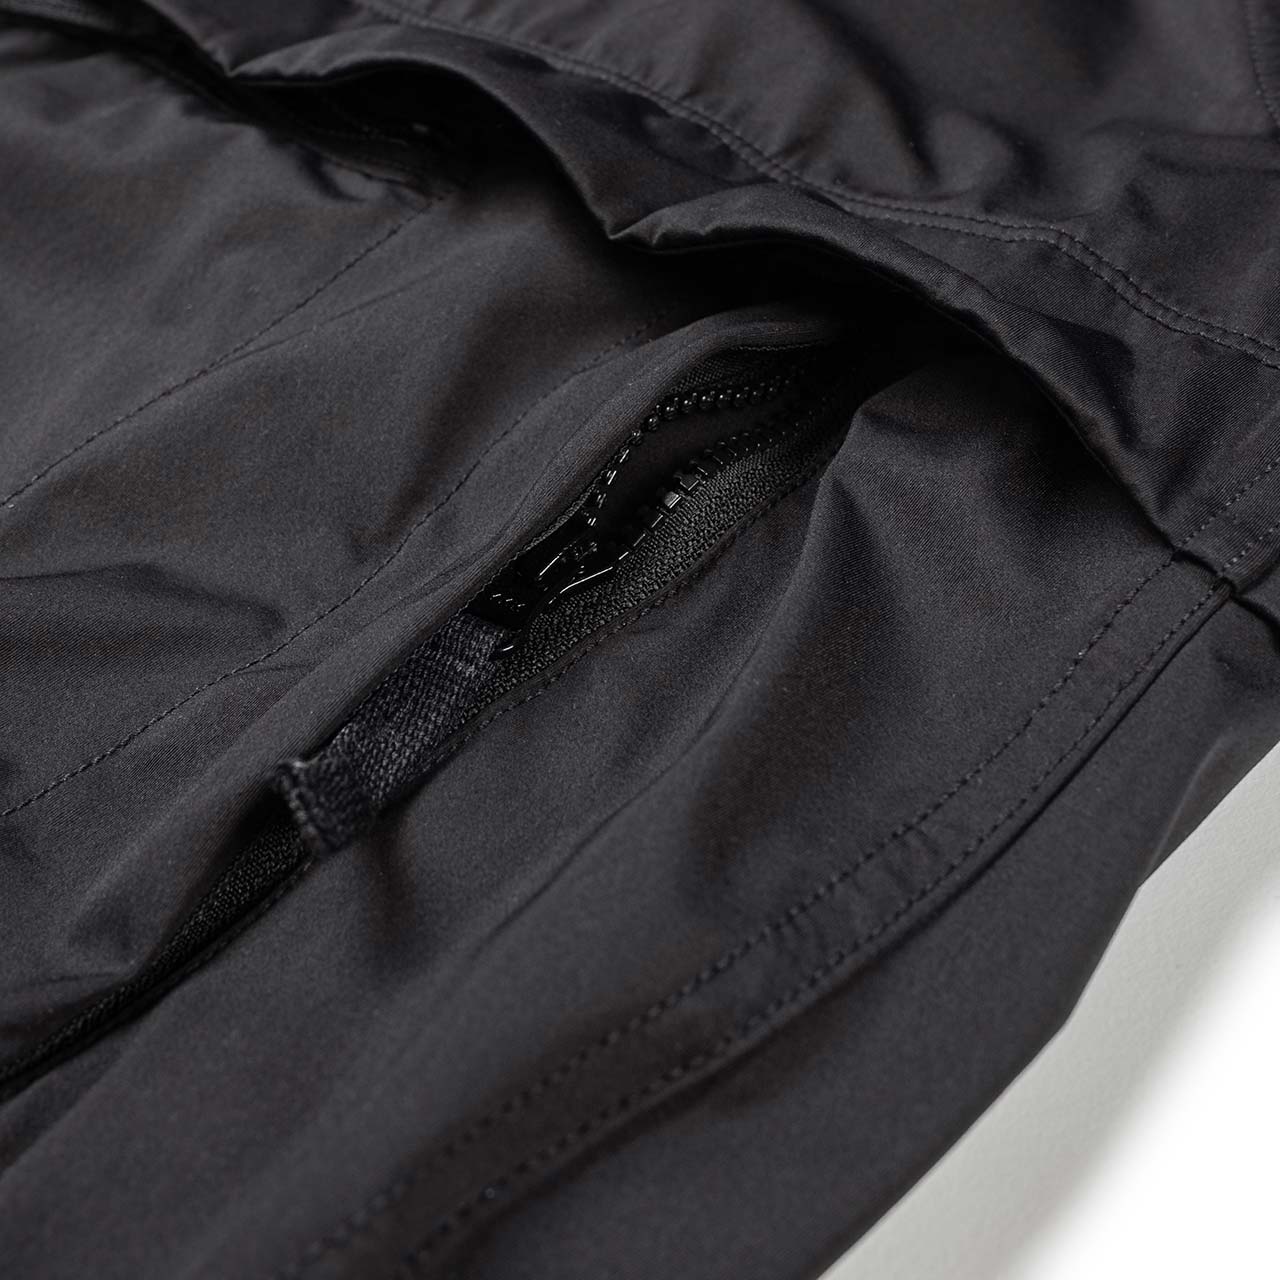 stone island shadow project packable anorak (black) - 721940504.v0029 - a.plus - Image - 4